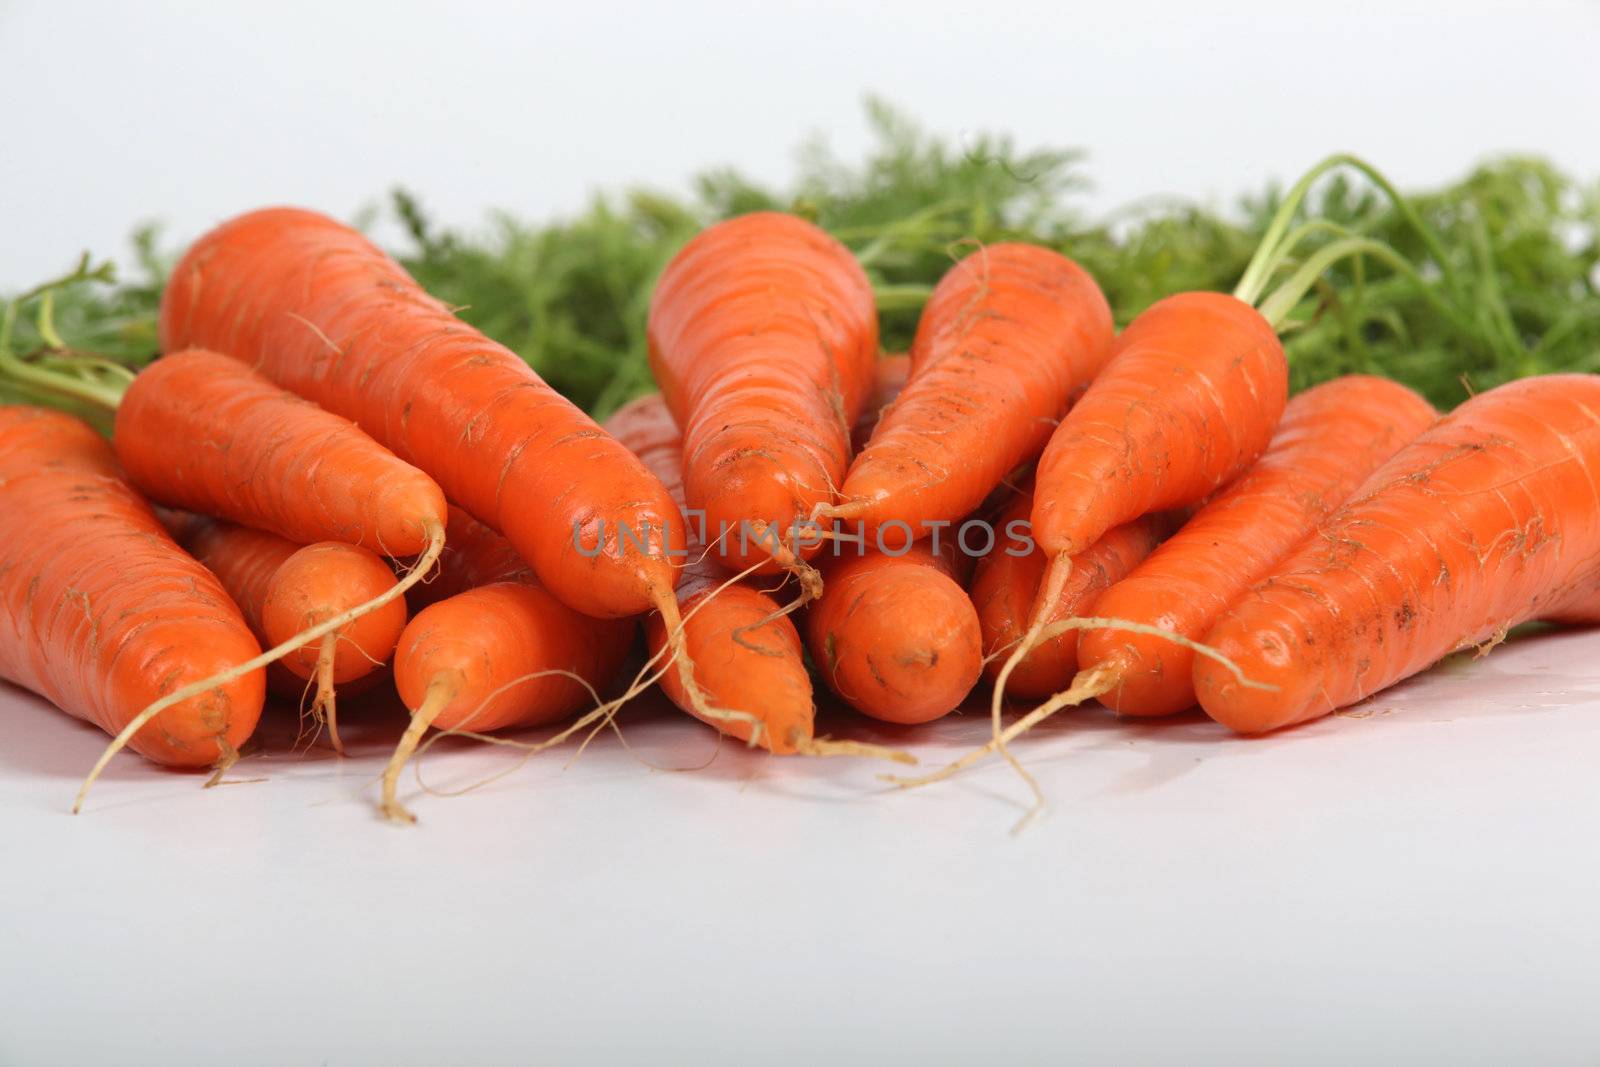 Carrots by phovoir